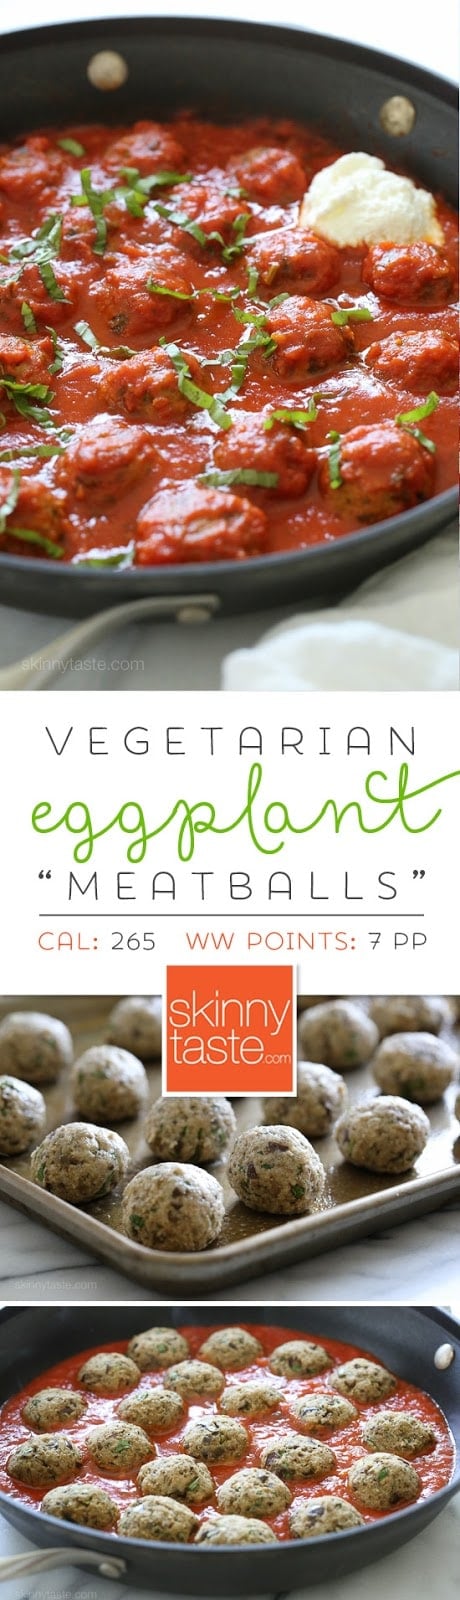 Eggplant "Meatballs" – hearty eggplant is one of the best vegetable substitutes to make these luscious, meatless “meatballs”.